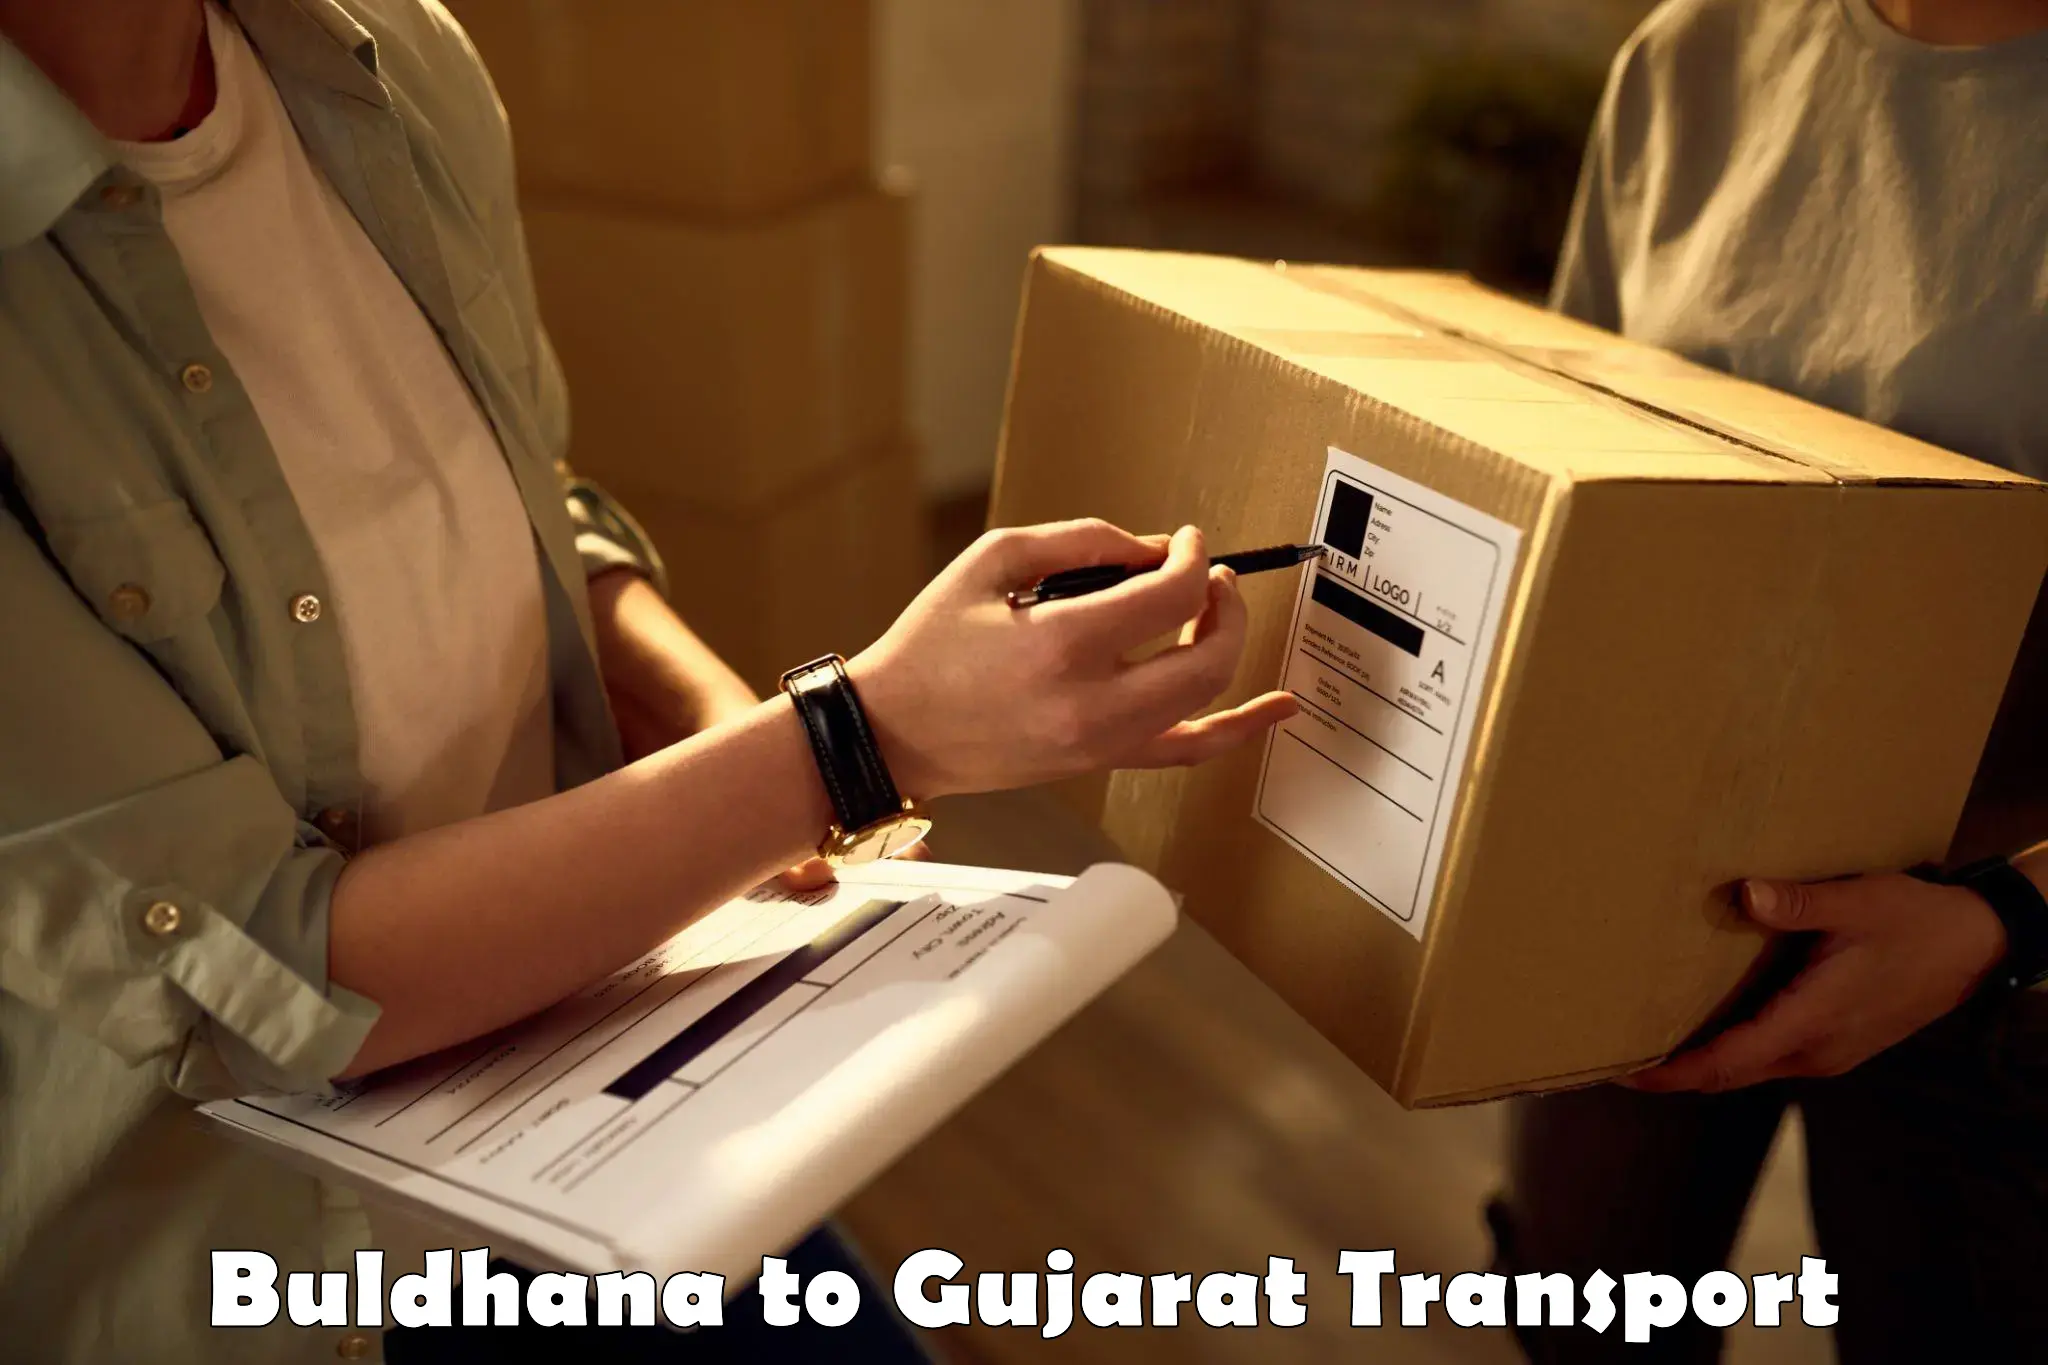 Transport bike from one state to another Buldhana to Gandhinagar